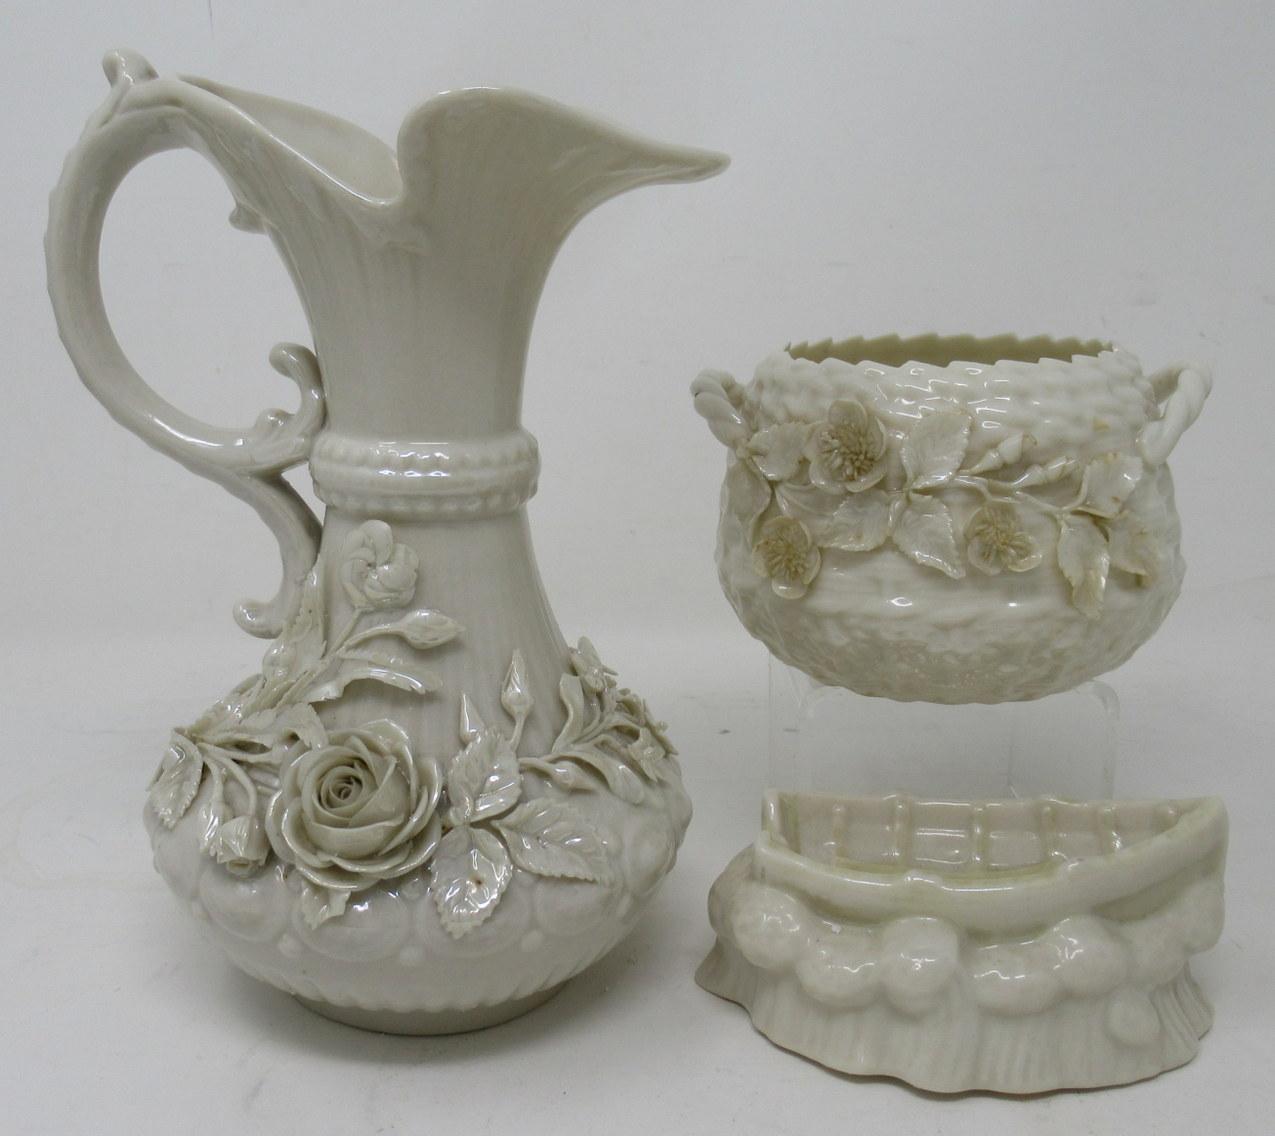 Stunning assembled Collection of three wonderful early Irish Black Mark Belleek Items to include a quite rare seldom seen rope handled small bowl. 

All pieces are Second Period Black Mark for 1863-1891 

Medium size Aberdeen Ewer or Pitcher of